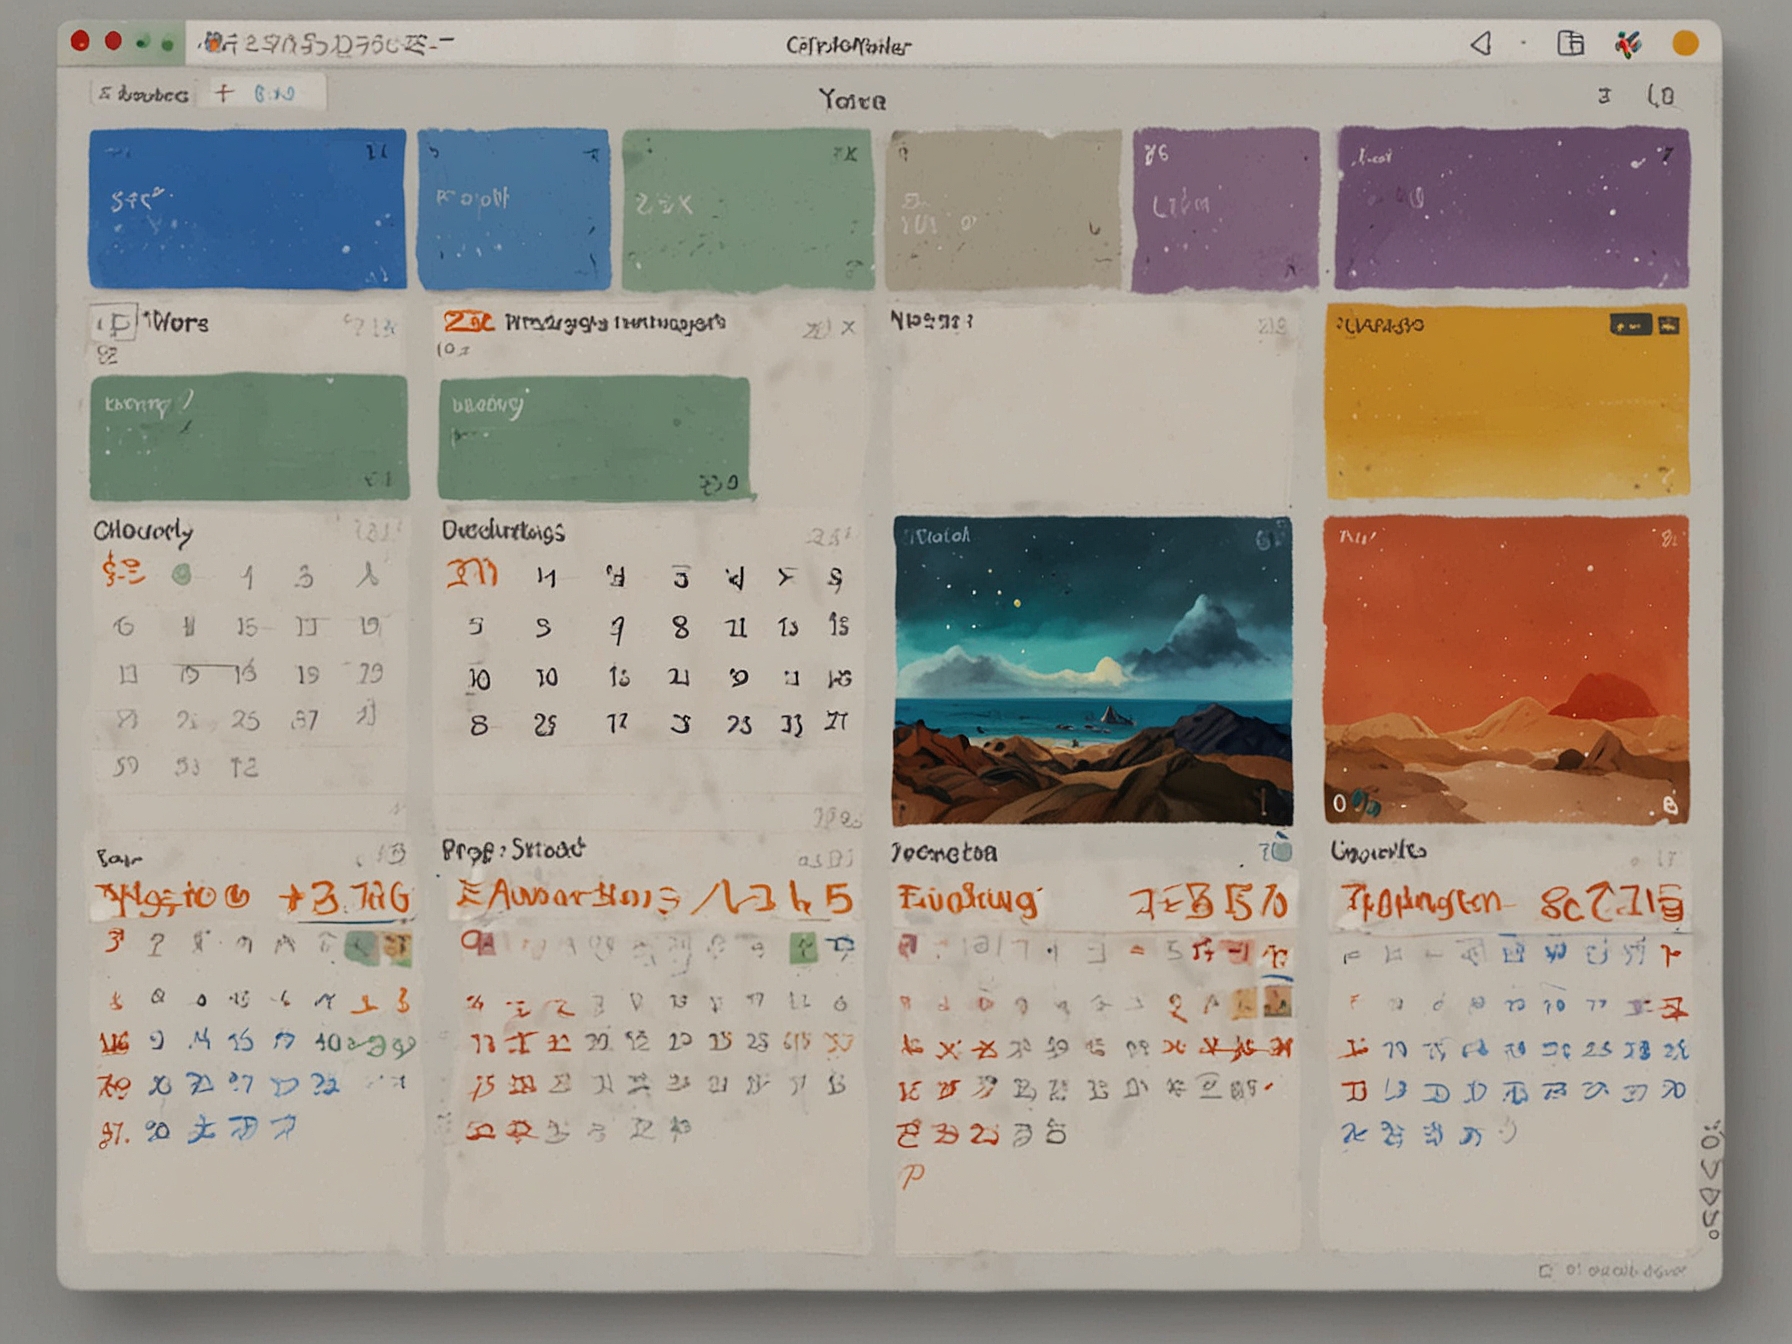 An illustration showcasing multi-calendar support in ChromeOS 126, where multiple calendars are seamlessly integrated into a single unified view for better schedule management.